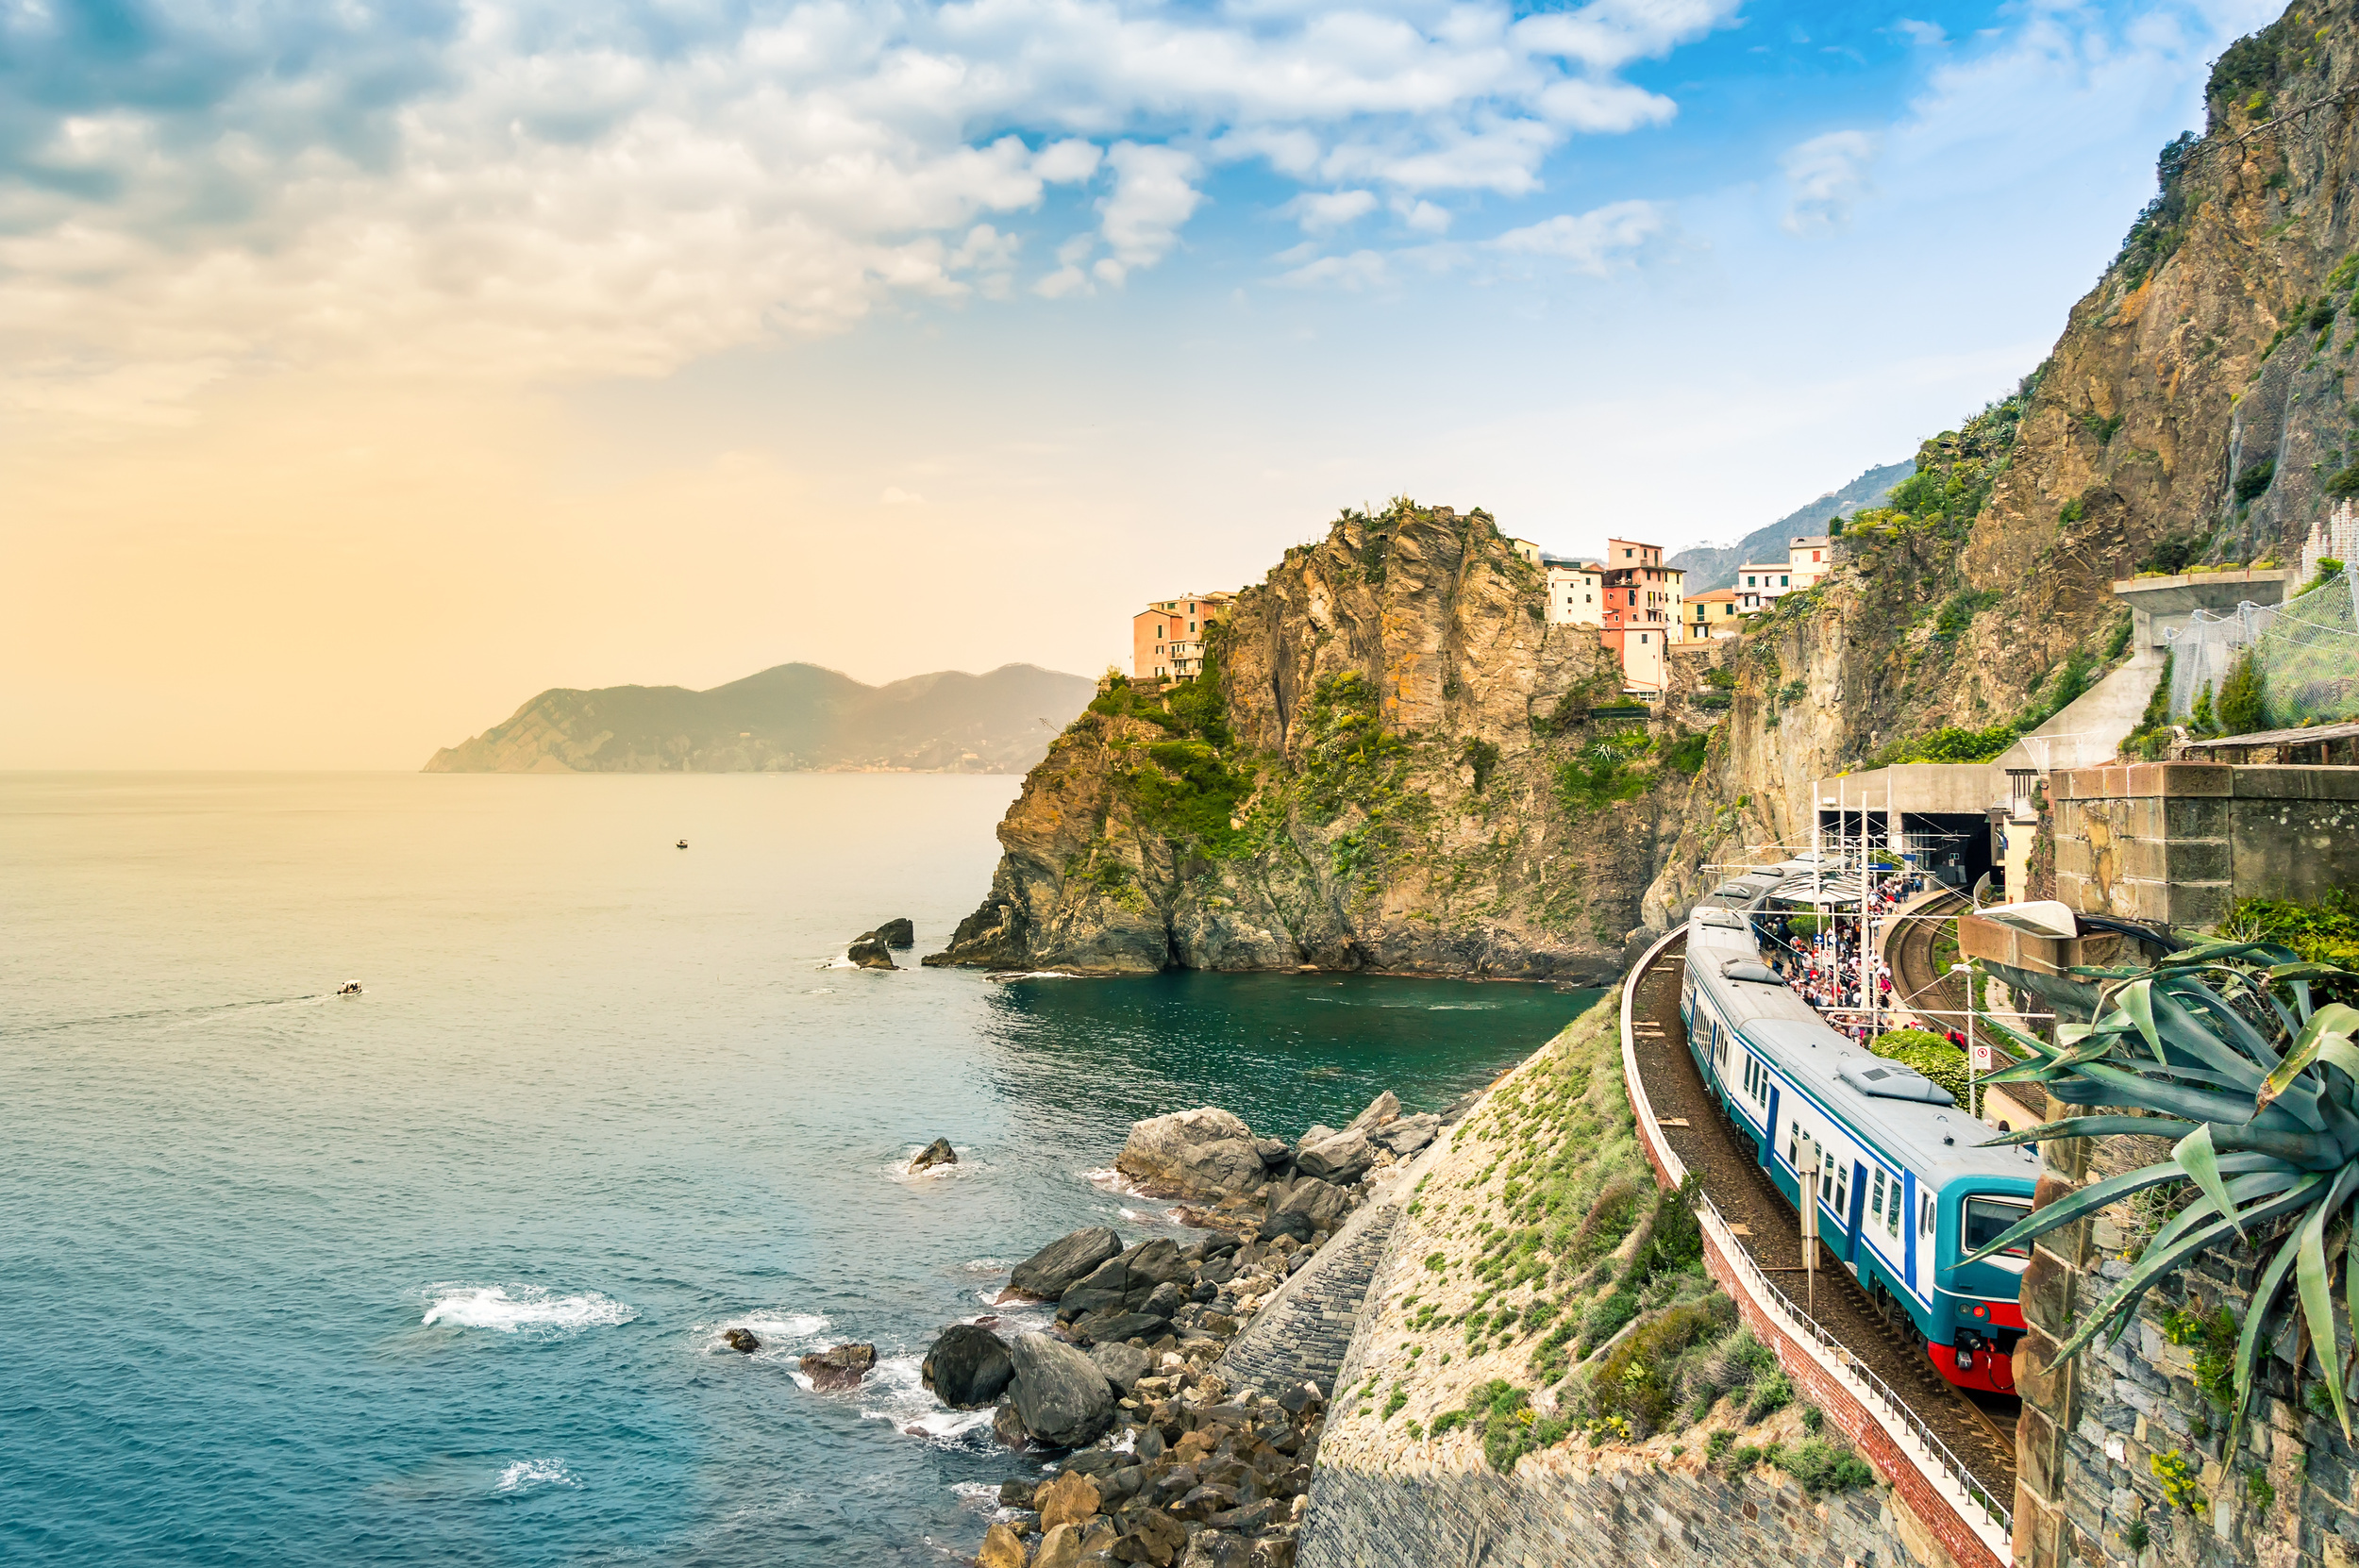 <p>Cinque Terre is one of the most magical destinations in Italy, but it can be a bit tricky to get around. But the train from Levanto to La Spezia, which lasts just under an hour, is the perfect solution. You’ll catch epic coastline views and candy-colored houses in the hills of the villages.</p><p><a href='https://www.msn.com/en-us/community/channel/vid-cj9pqbr0vn9in2b6ddcd8sfgpfq6x6utp44fssrv6mc2gtybw0us'>Did you enjoy this slideshow? Follow us on MSN to see more of our exclusive lifestyle content.</a></p>